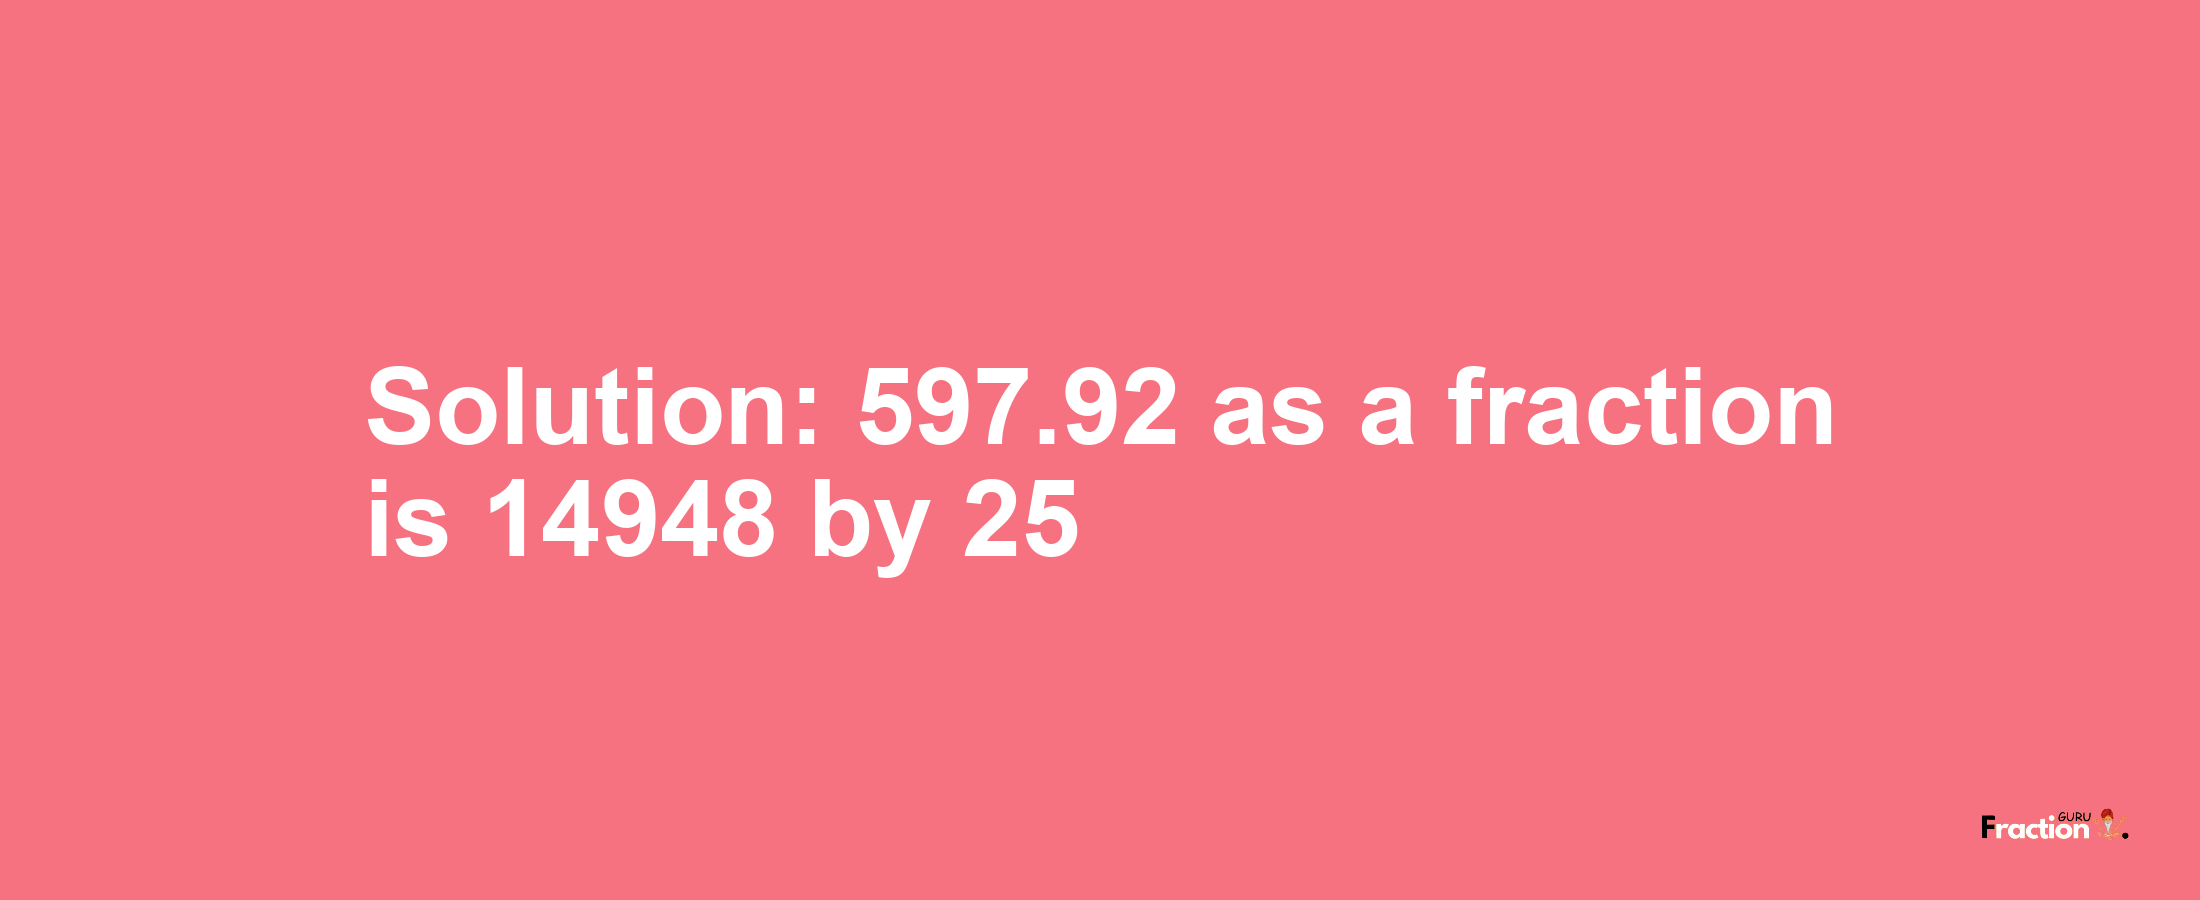 Solution:597.92 as a fraction is 14948/25